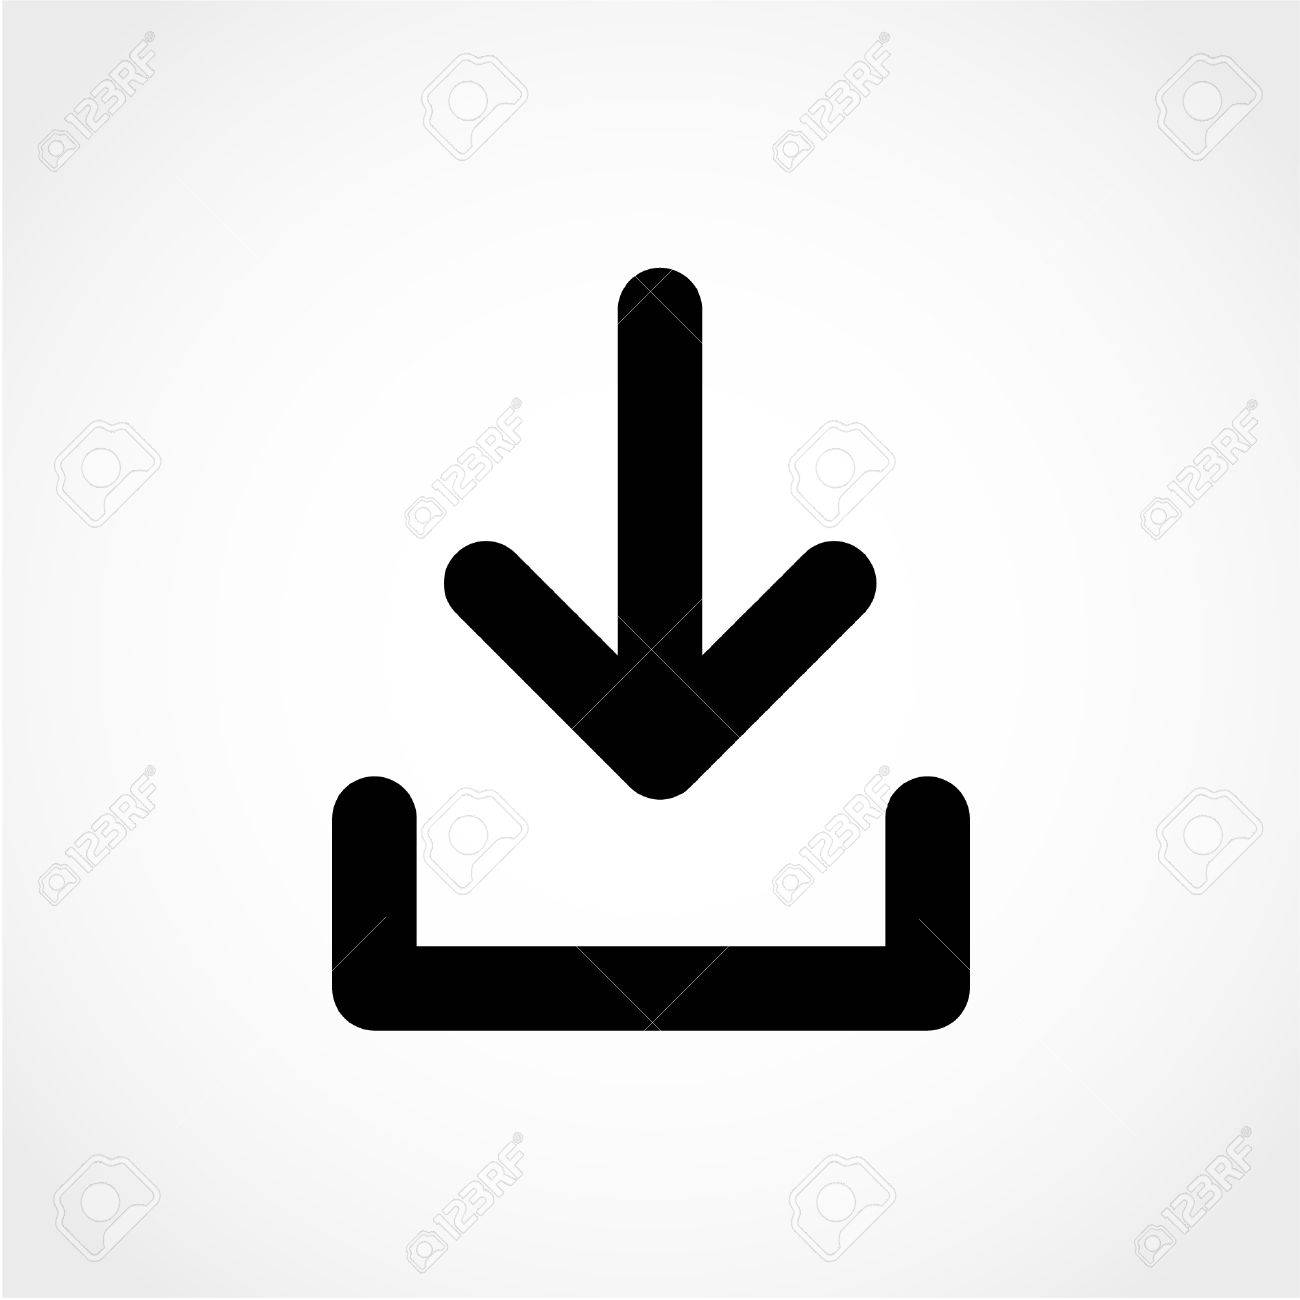 50991097-upload-button-load-symbol-download-icon-isolated-on-white-background.jpg